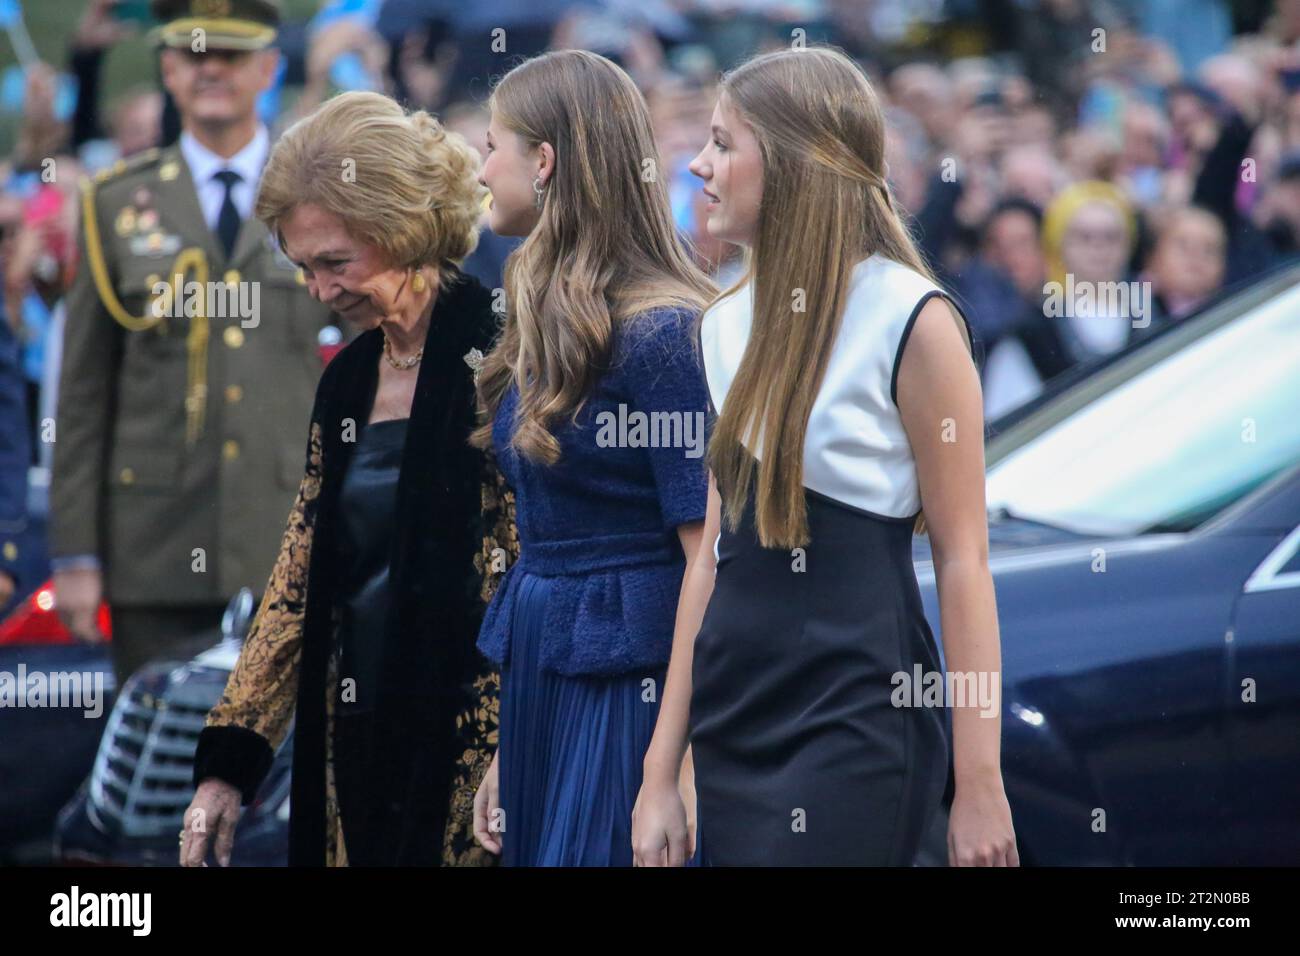 Oviedo, Asturias, 20th October, 2023: Queen Sofia de Borbón (L) with her granddaughters, the Princess of Asturias, Leonor de Borbón and the Infanta, Sofia de Borbón (R) during the Blue Carpet of the Princess Awards 2023, on October 20, 2023, in Oviedo, Spain. Credit: Alberto Brevers / Alamy Live News. Stock Photo